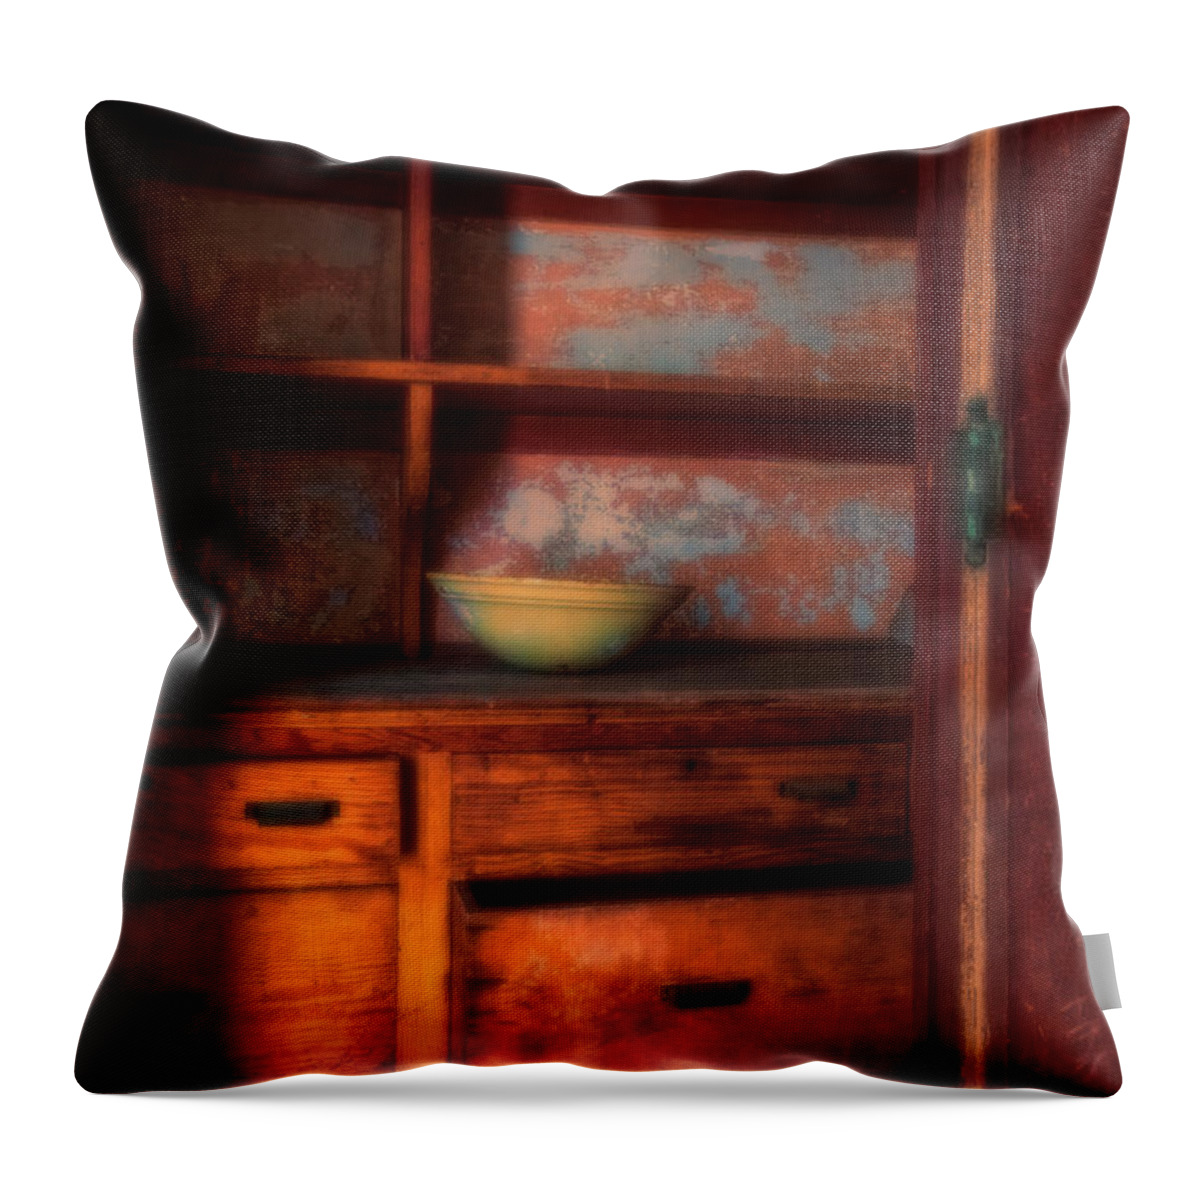 Jersey City New Jersey Throw Pillow featuring the photograph Ellis Island Cabinet by Tom Singleton